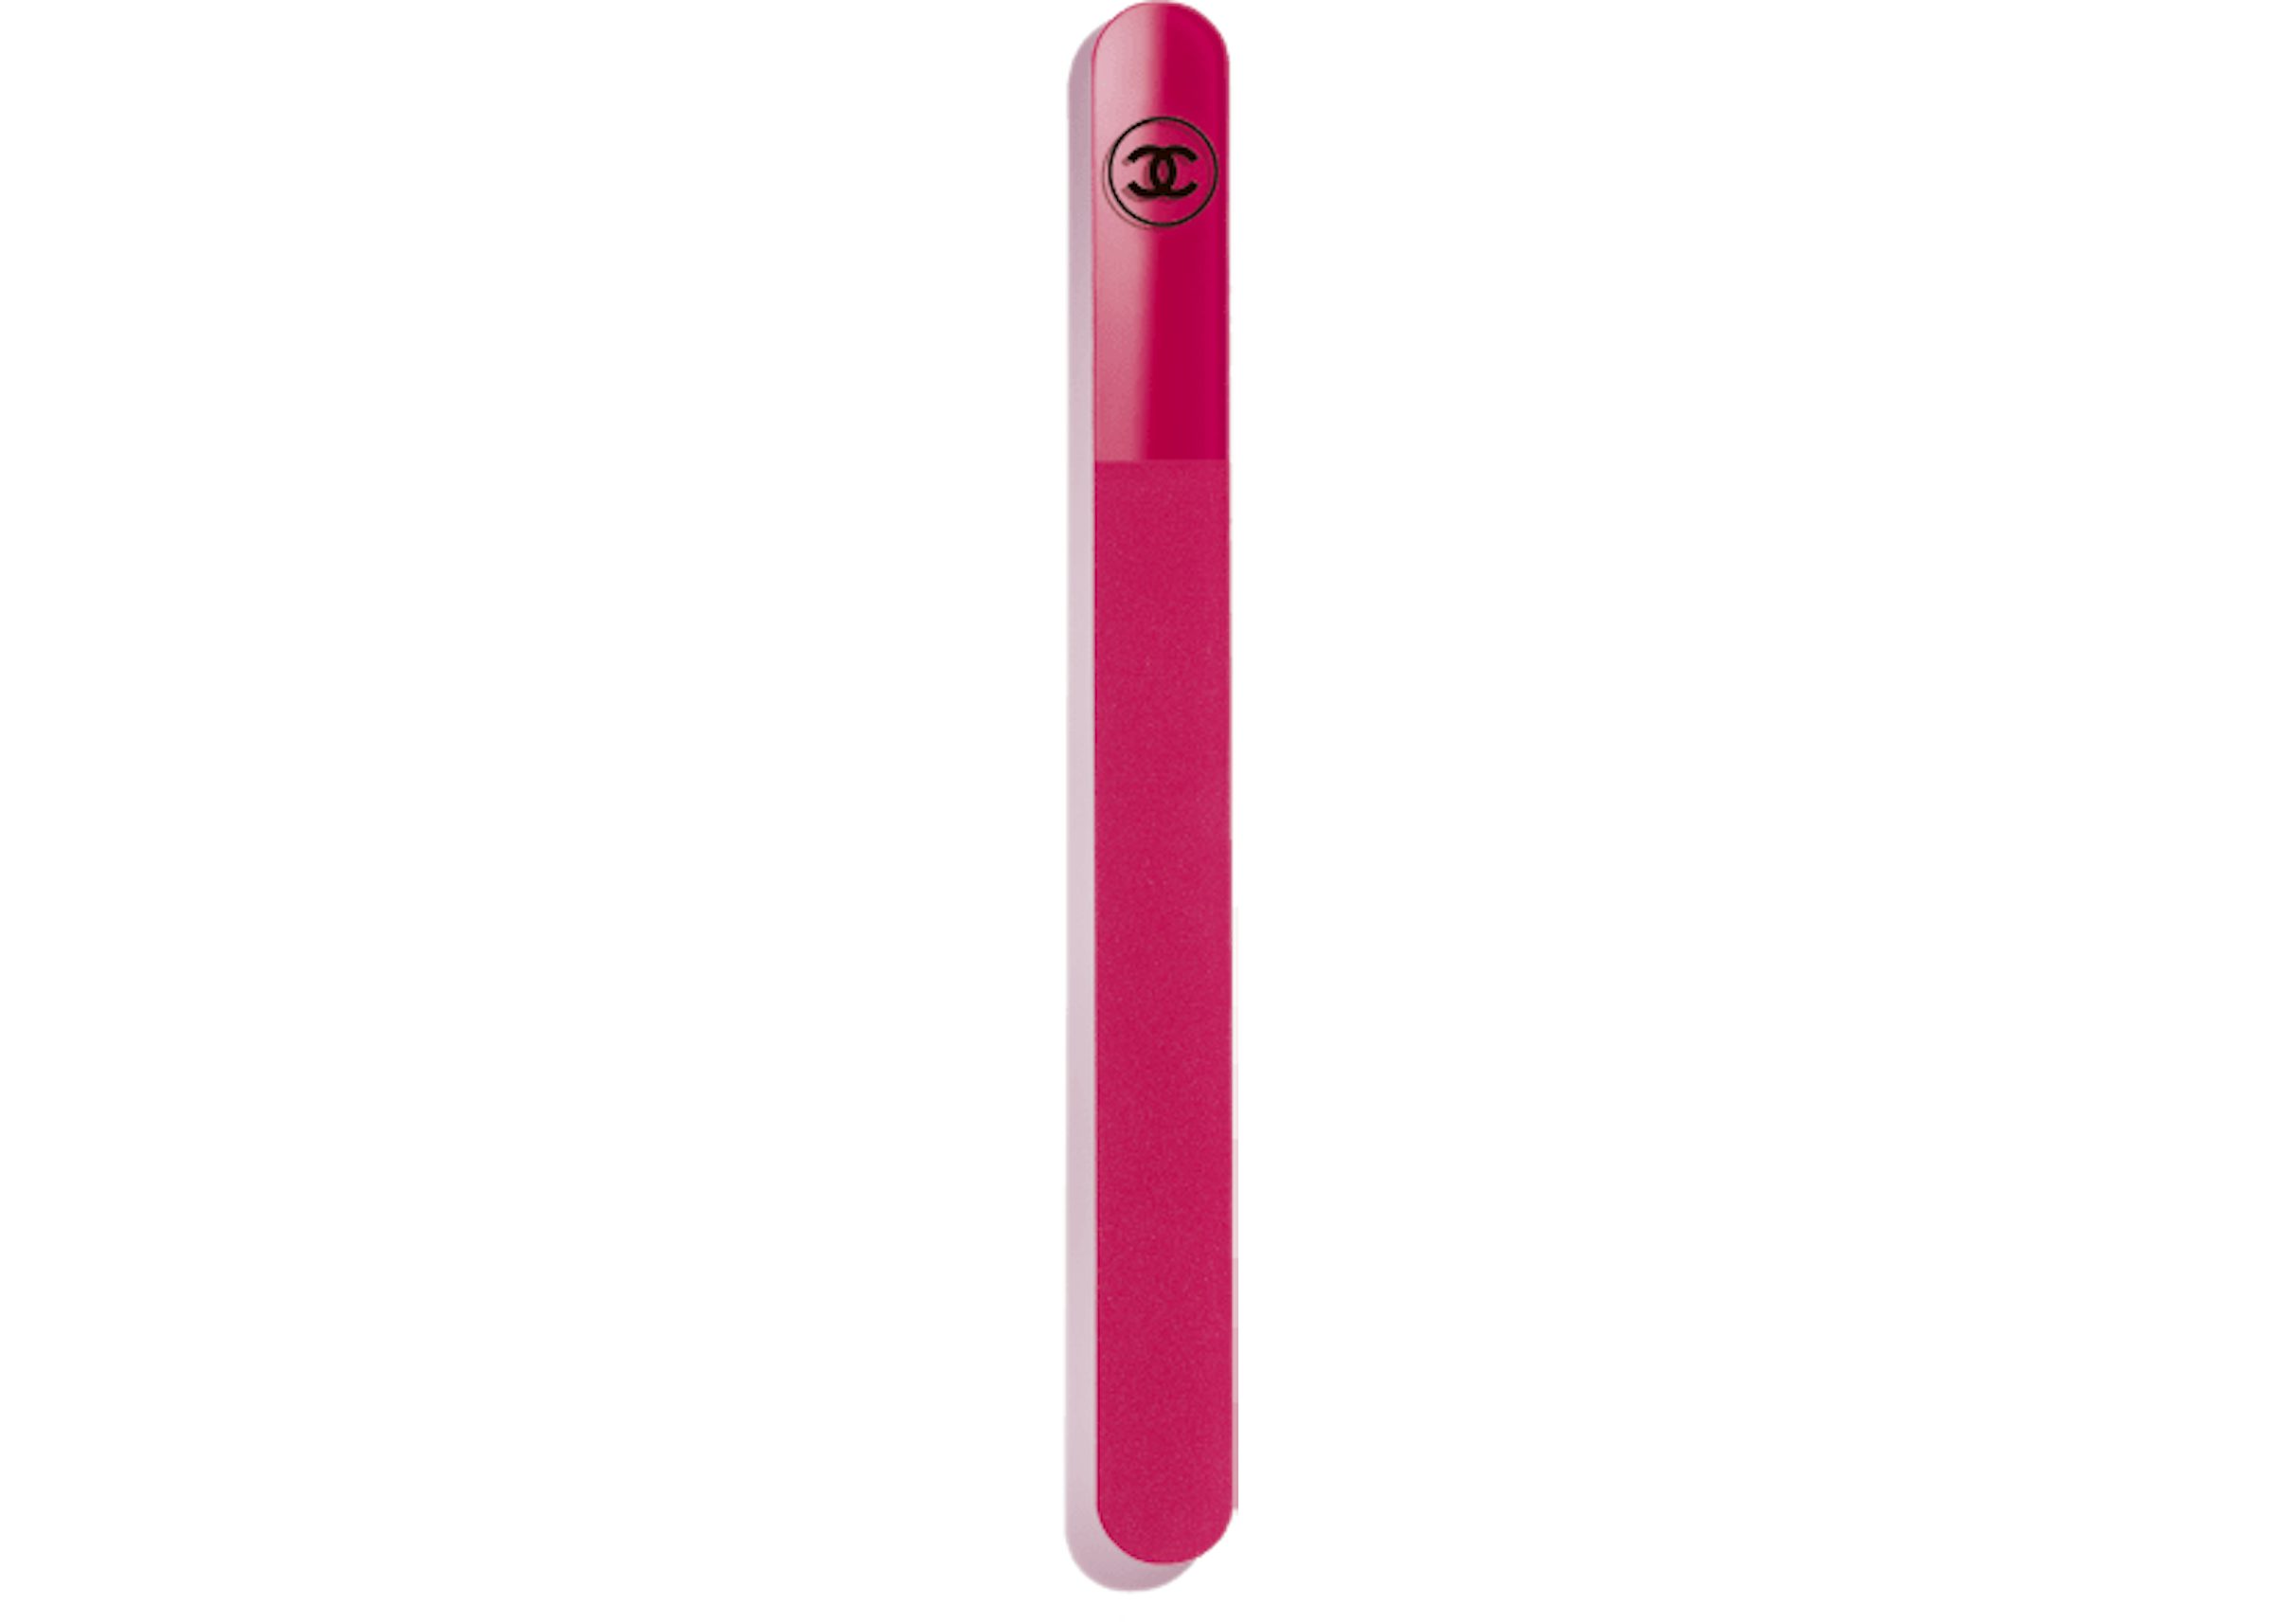 Chanel Codes Couleur Limited-Edition Nail File 143 - DIVA in Glass - GB